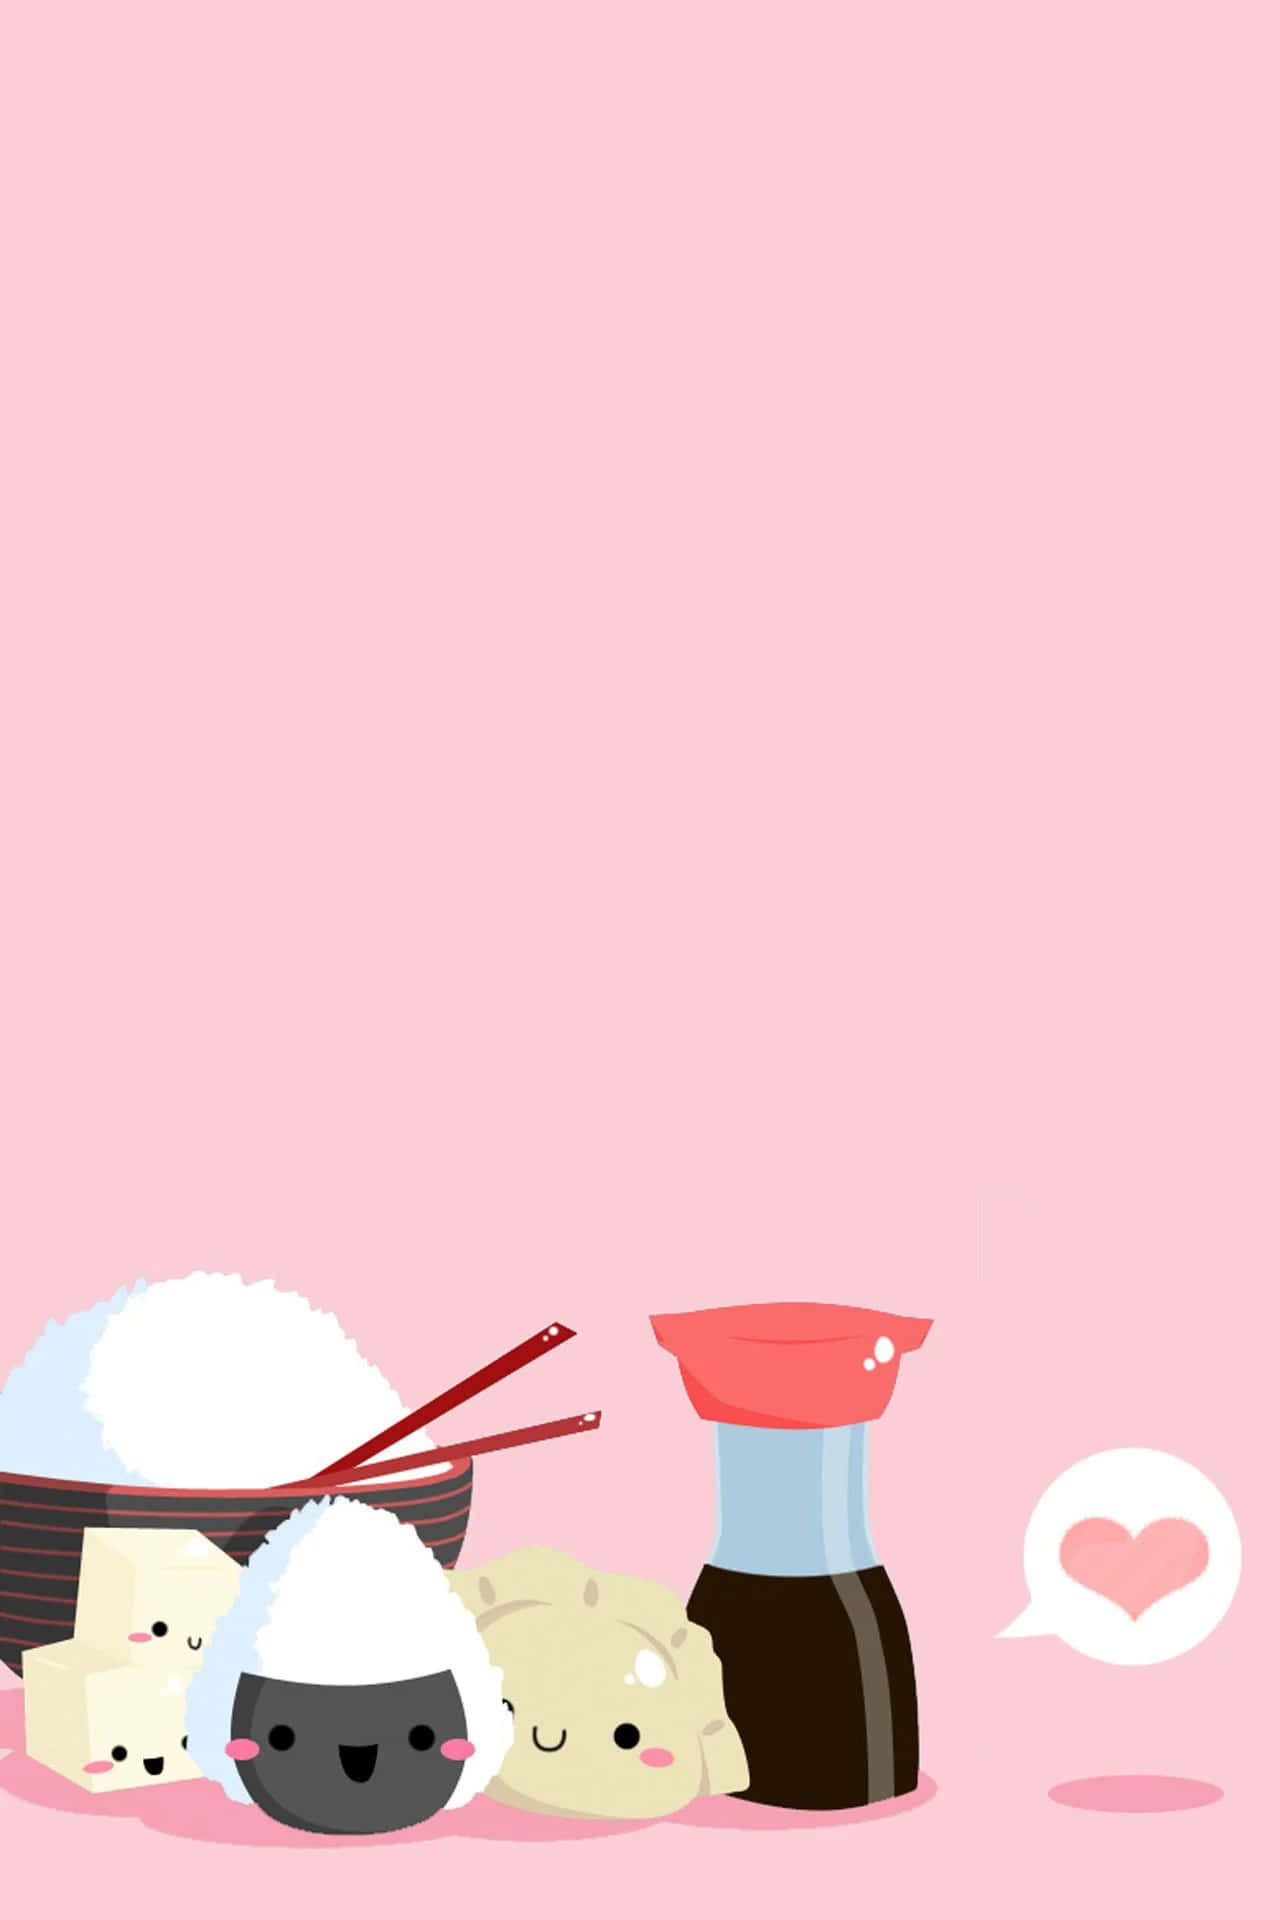 Show off your cute style with this fun, kawaii-inspired wallpaper